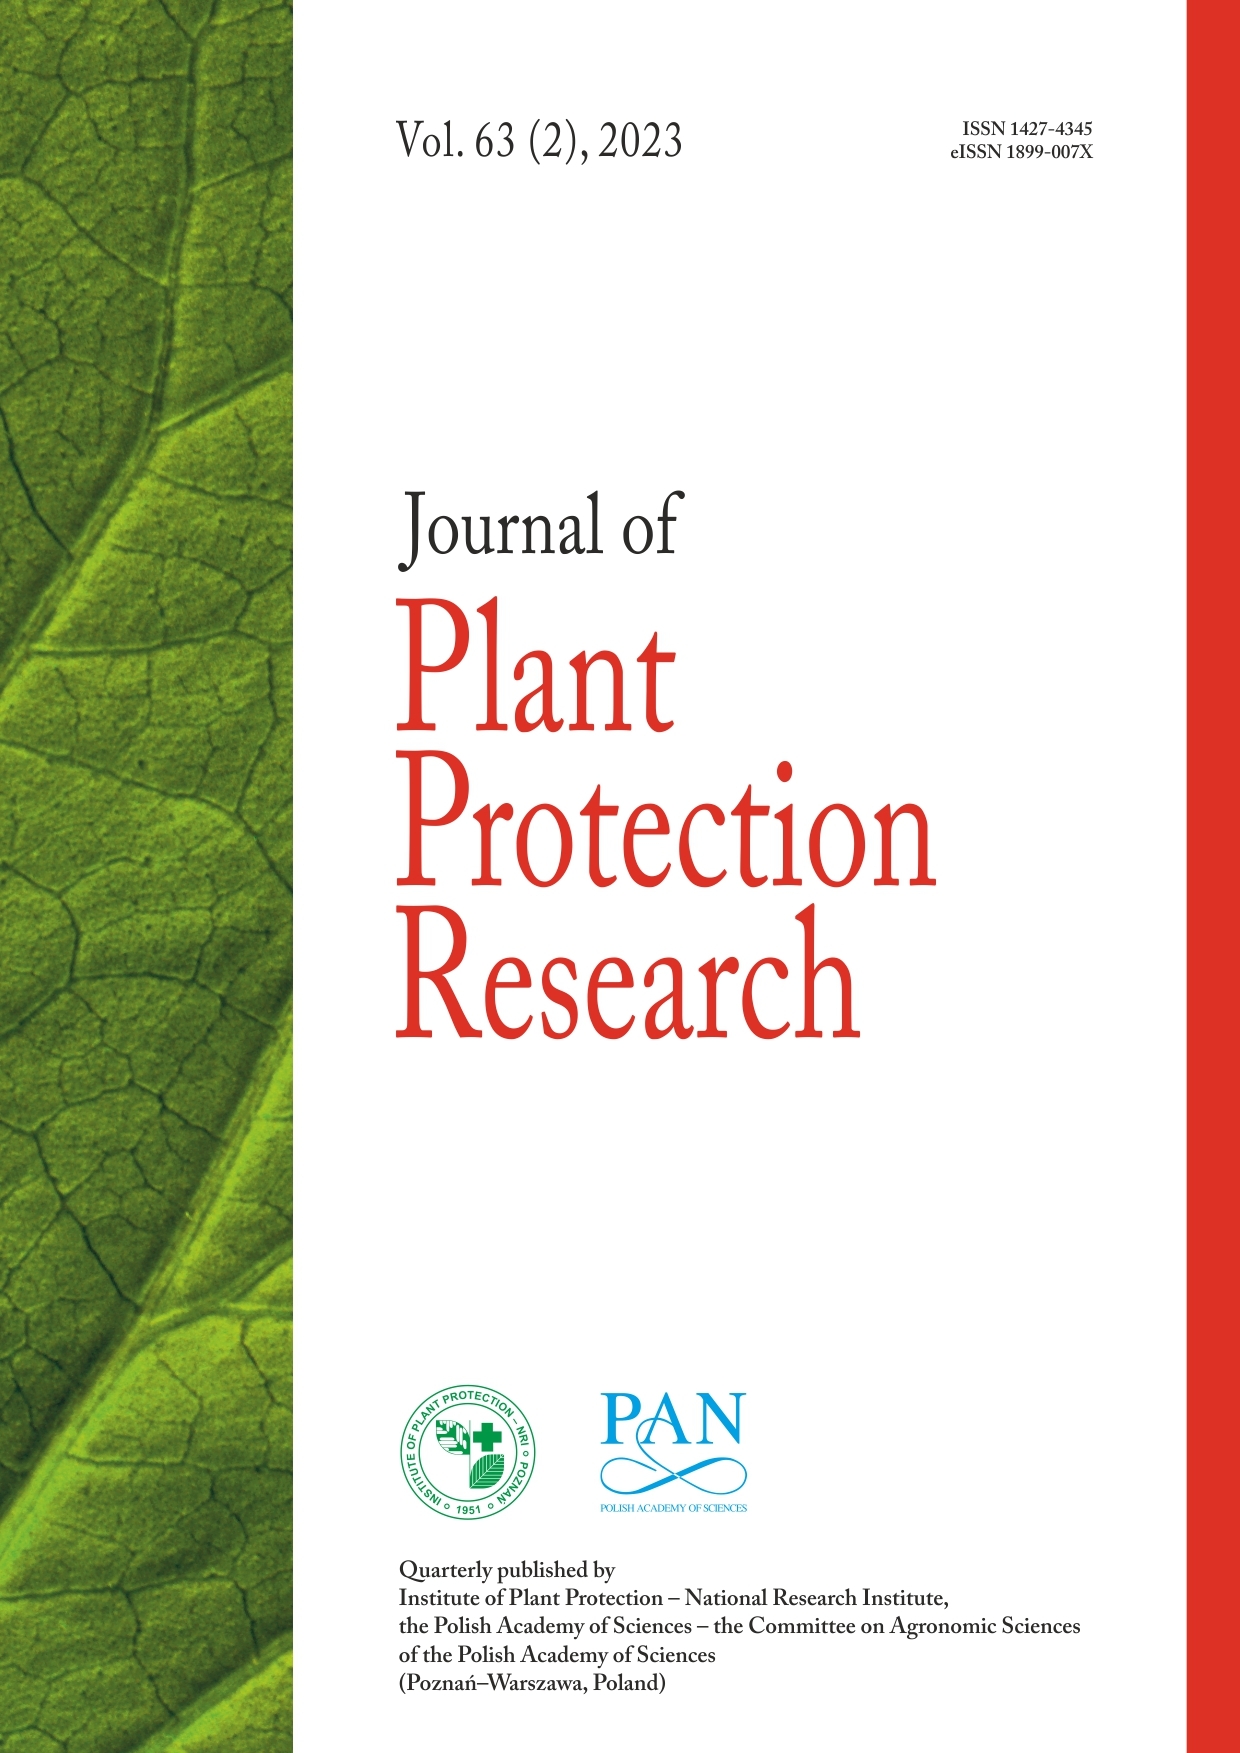 Journal of Plant Protection Research - Topic Entomology